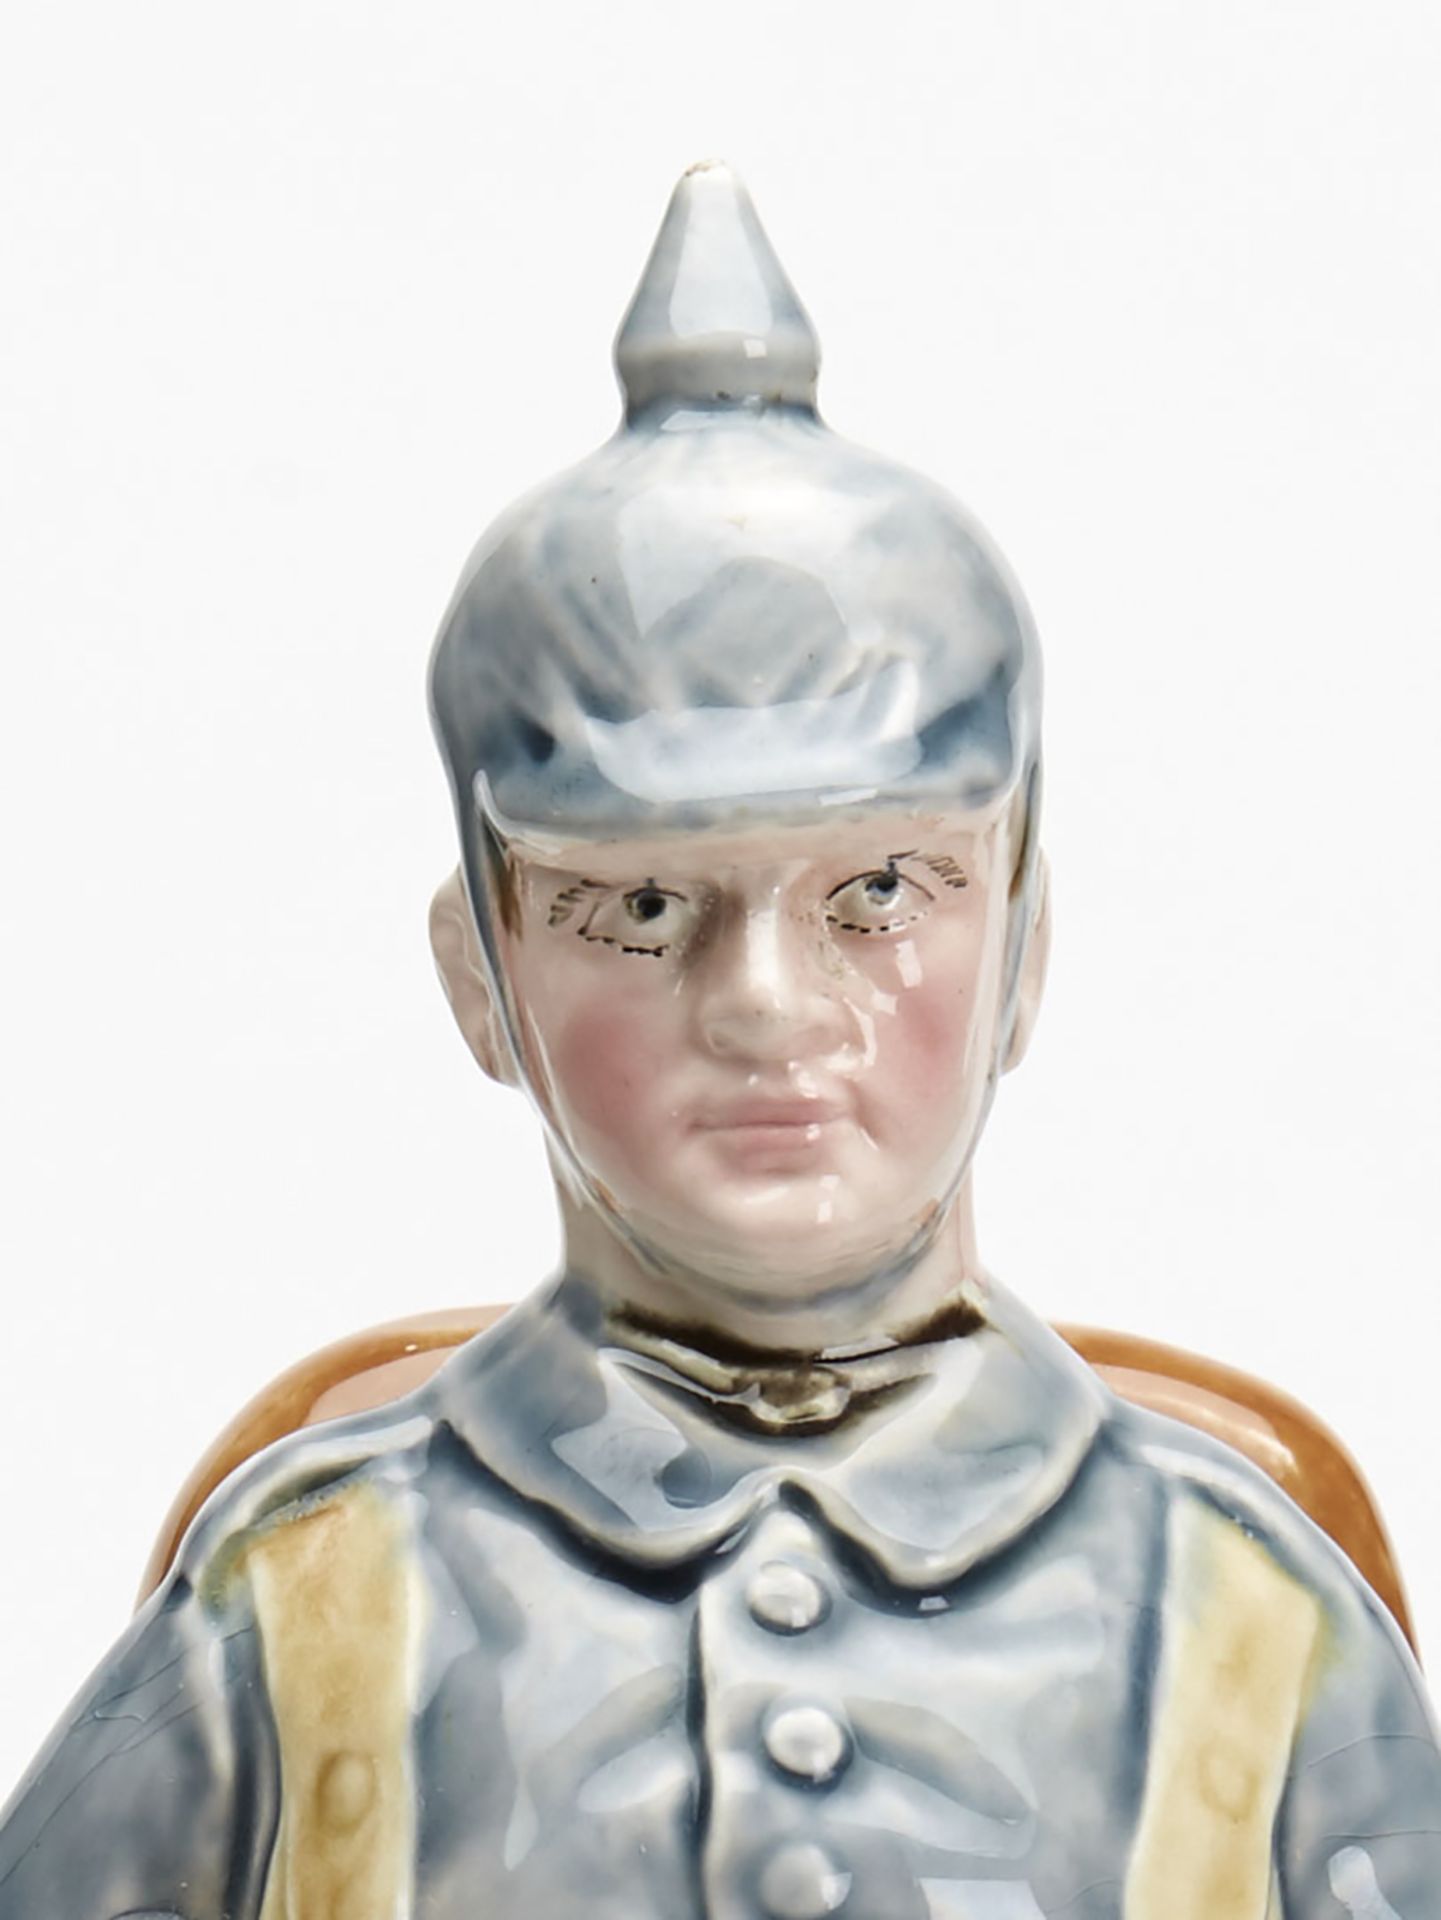 Rare Majolica German Infantry Soldier Figure 19Th C. - Image 7 of 10